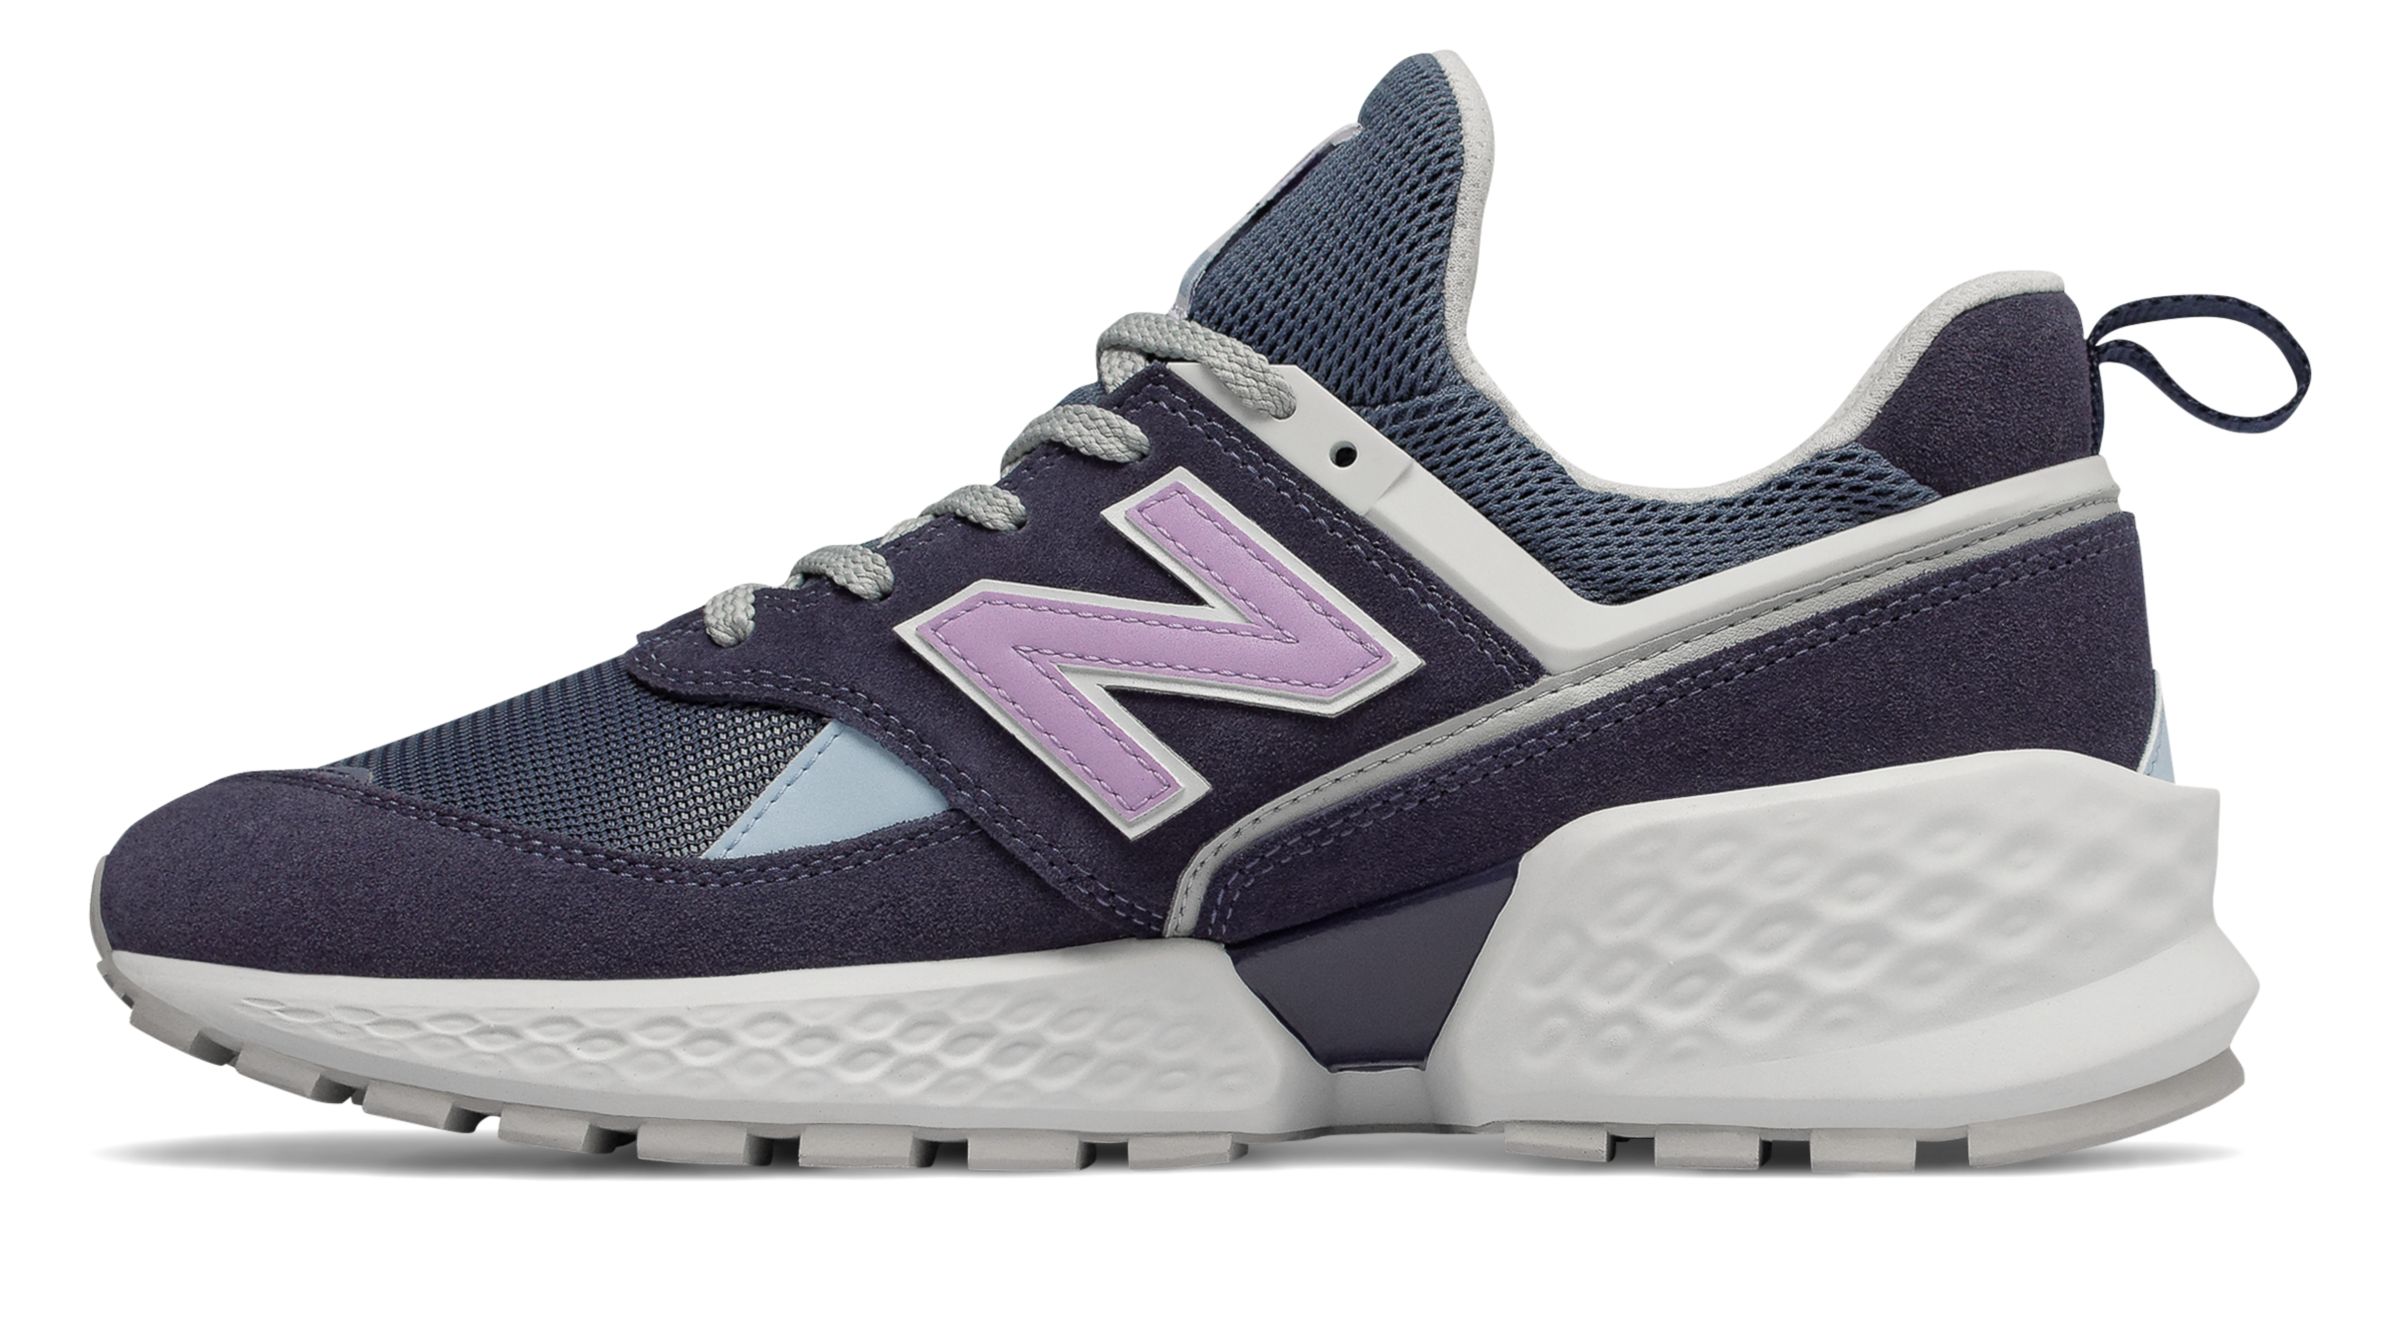 New Balance MS574-V2SM on Sale - Discounts Up to 60% Off on MS574GNA at  Joe's New Balance Outlet